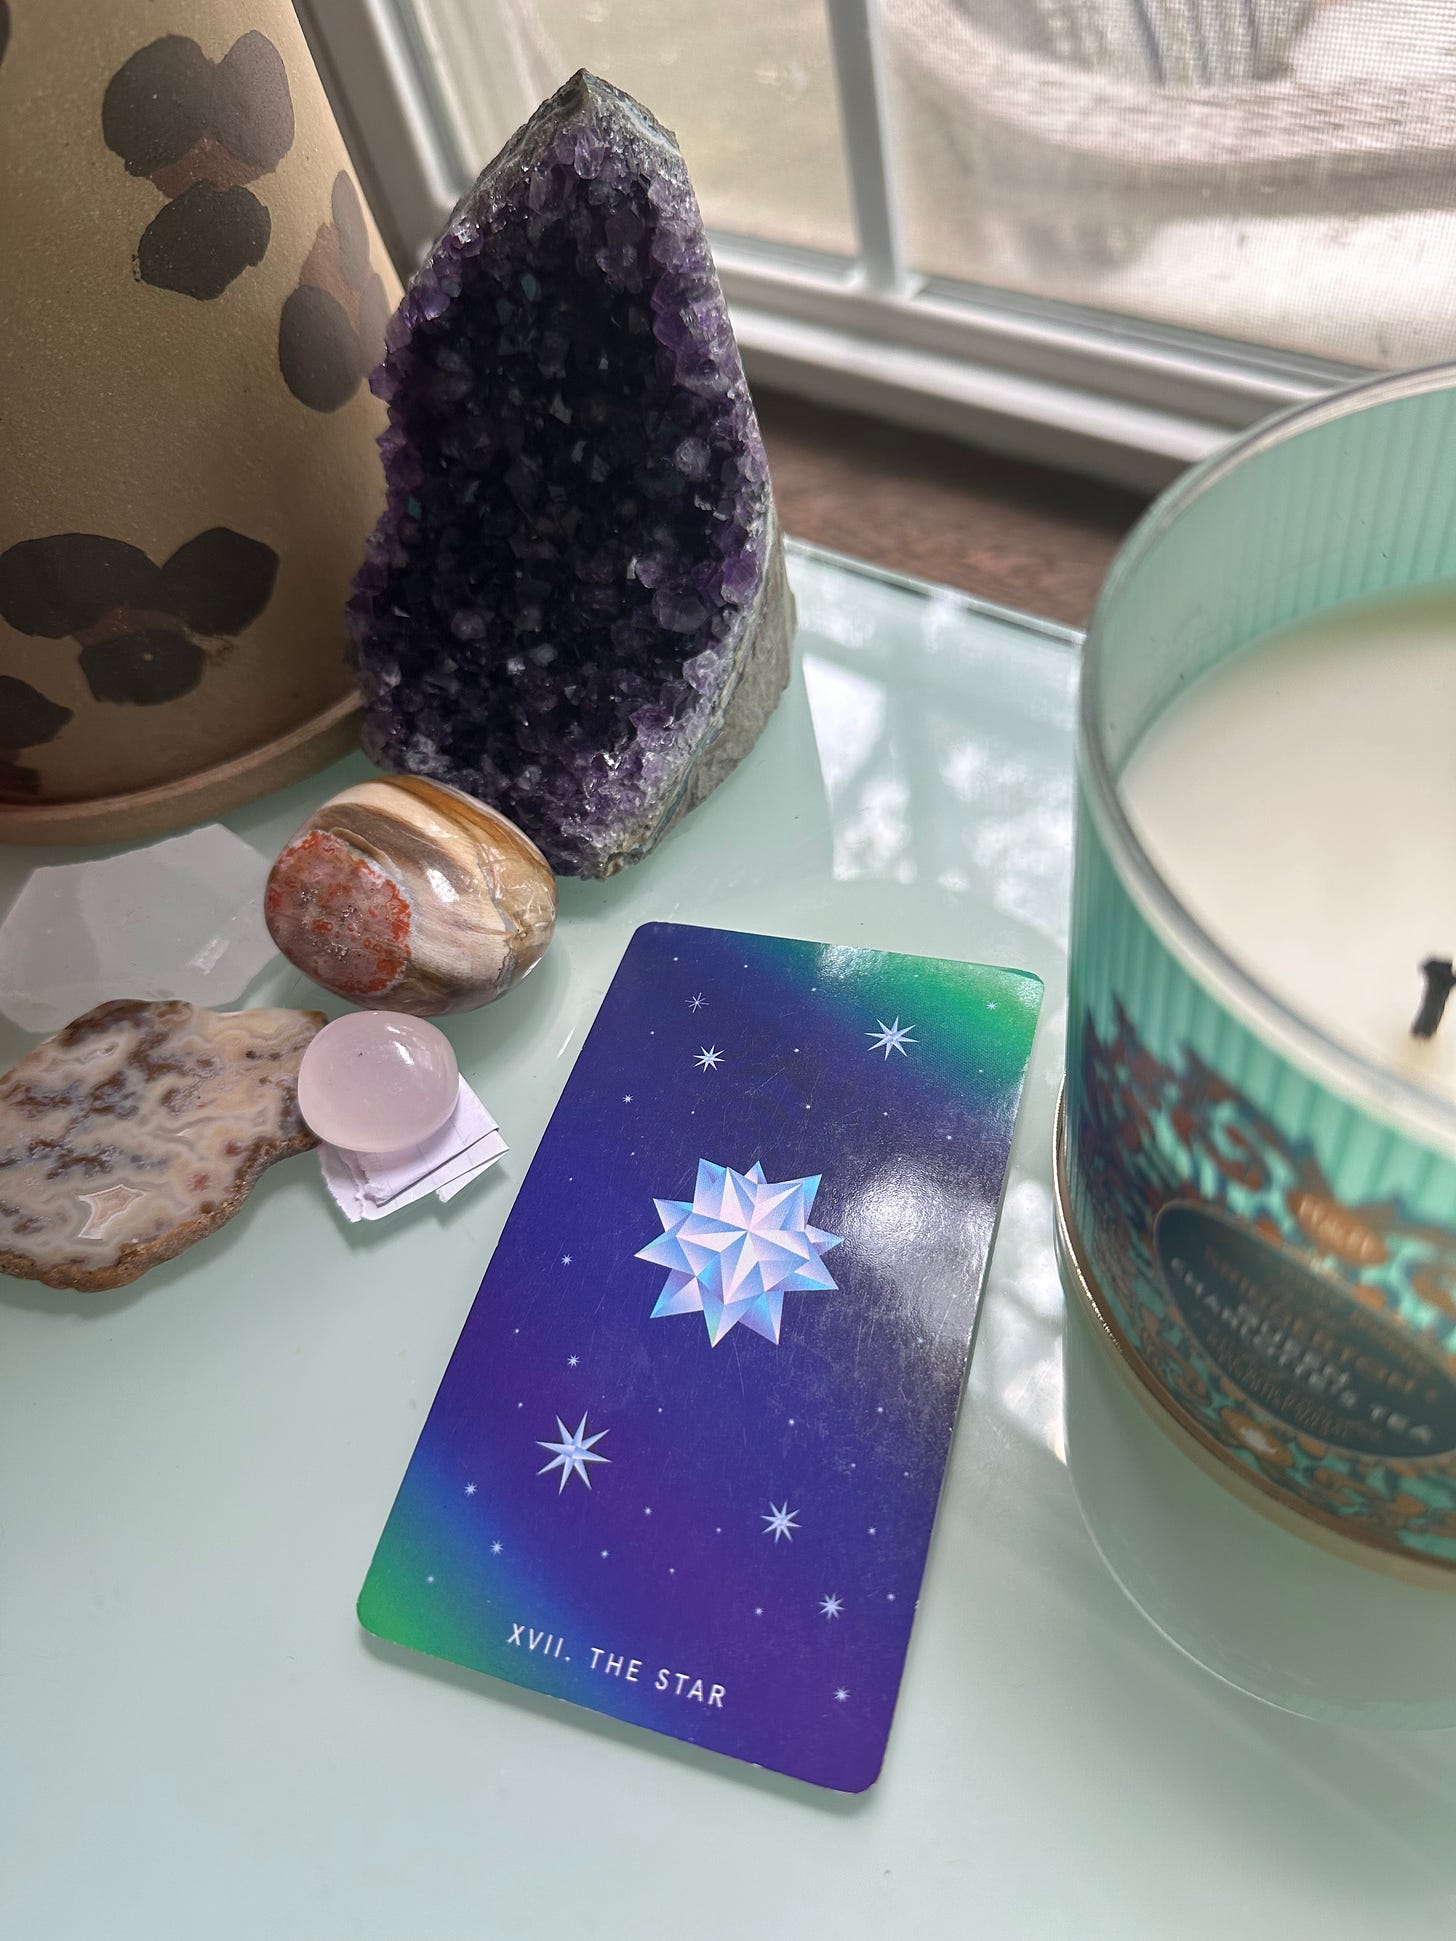 The Star Tarot card sits on a table between crystals and a candle.